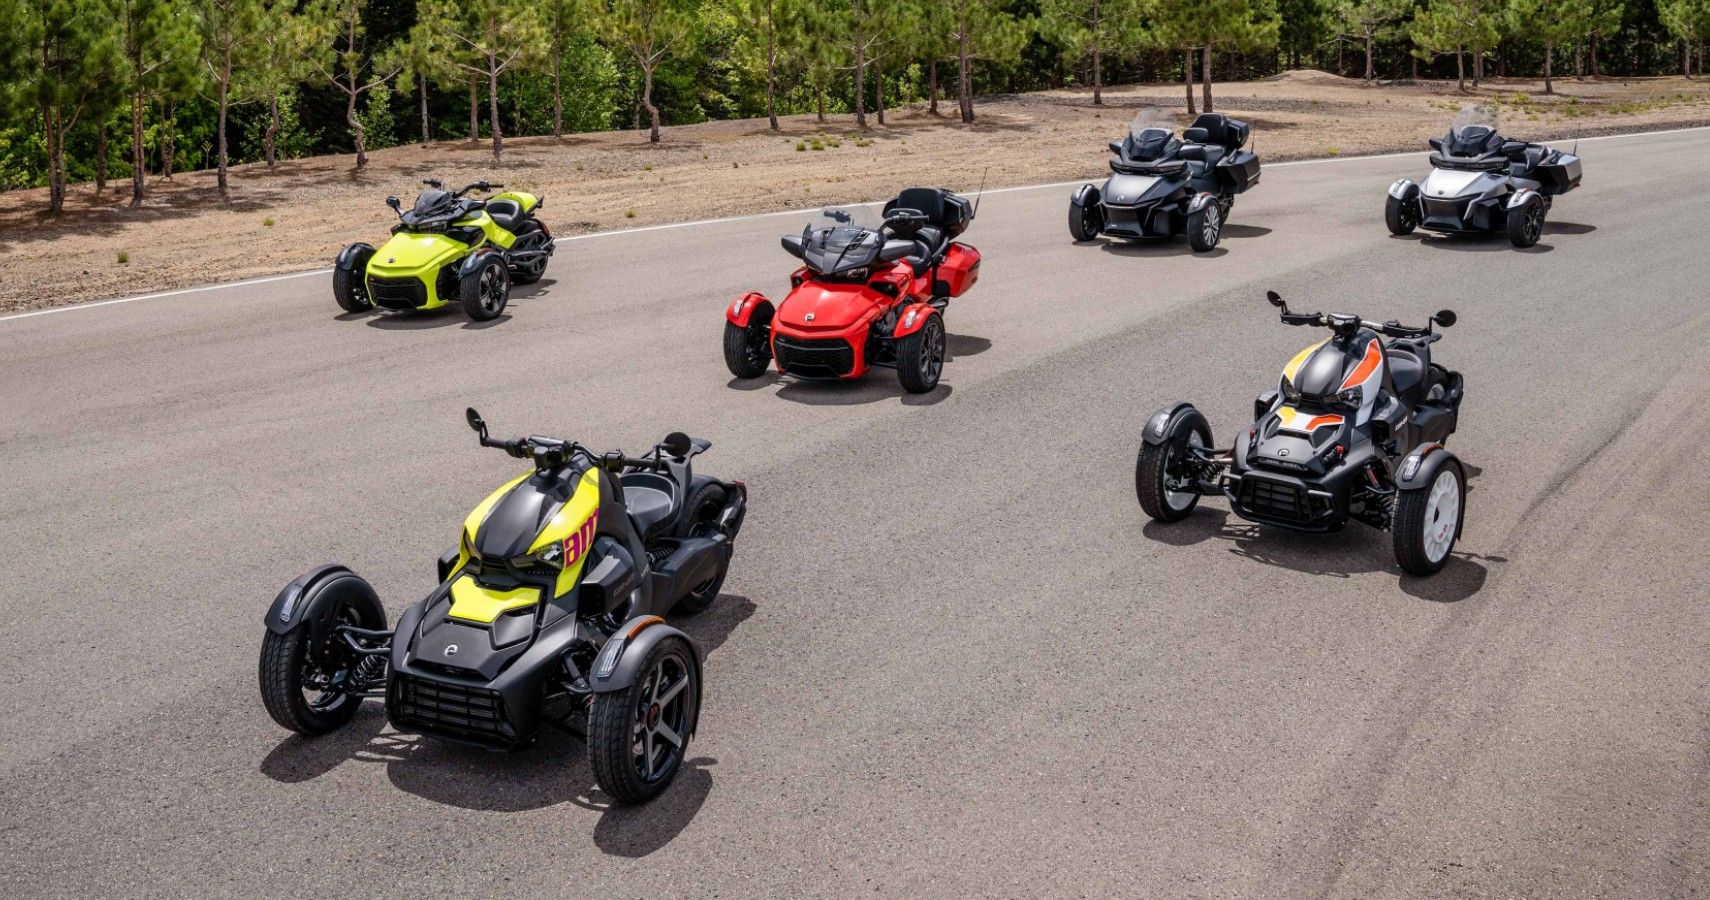 The 2022 Can-Am on-road model lineup parked on a road.